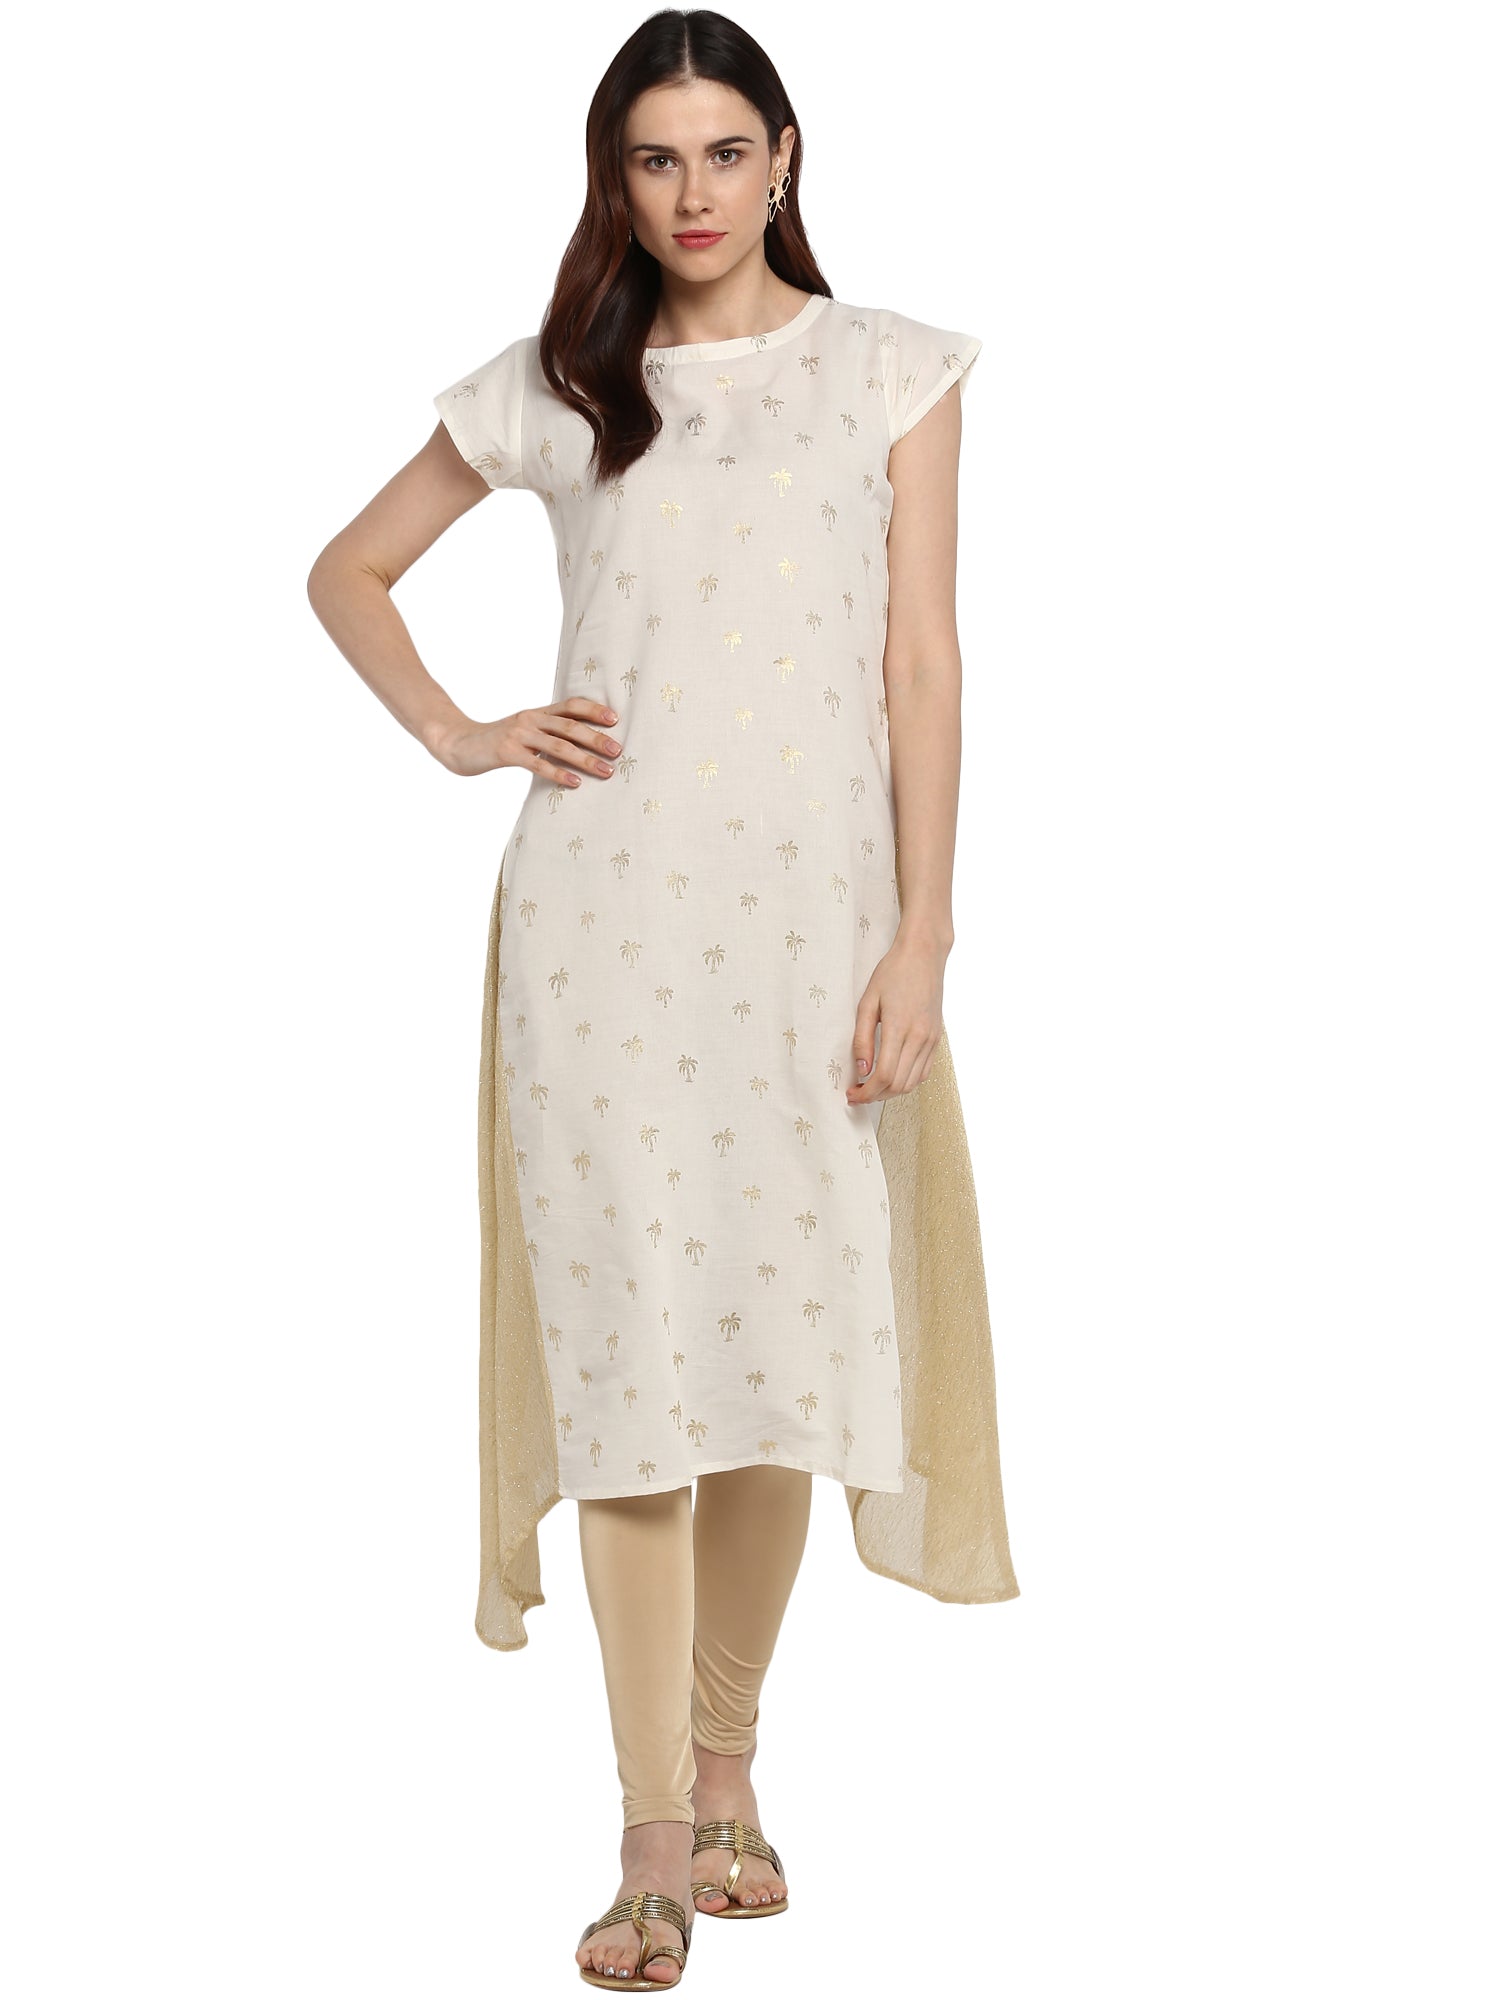 Women's Cream & Gold Cotton Only Kurta With Highlighted Slits - Ahalyaa